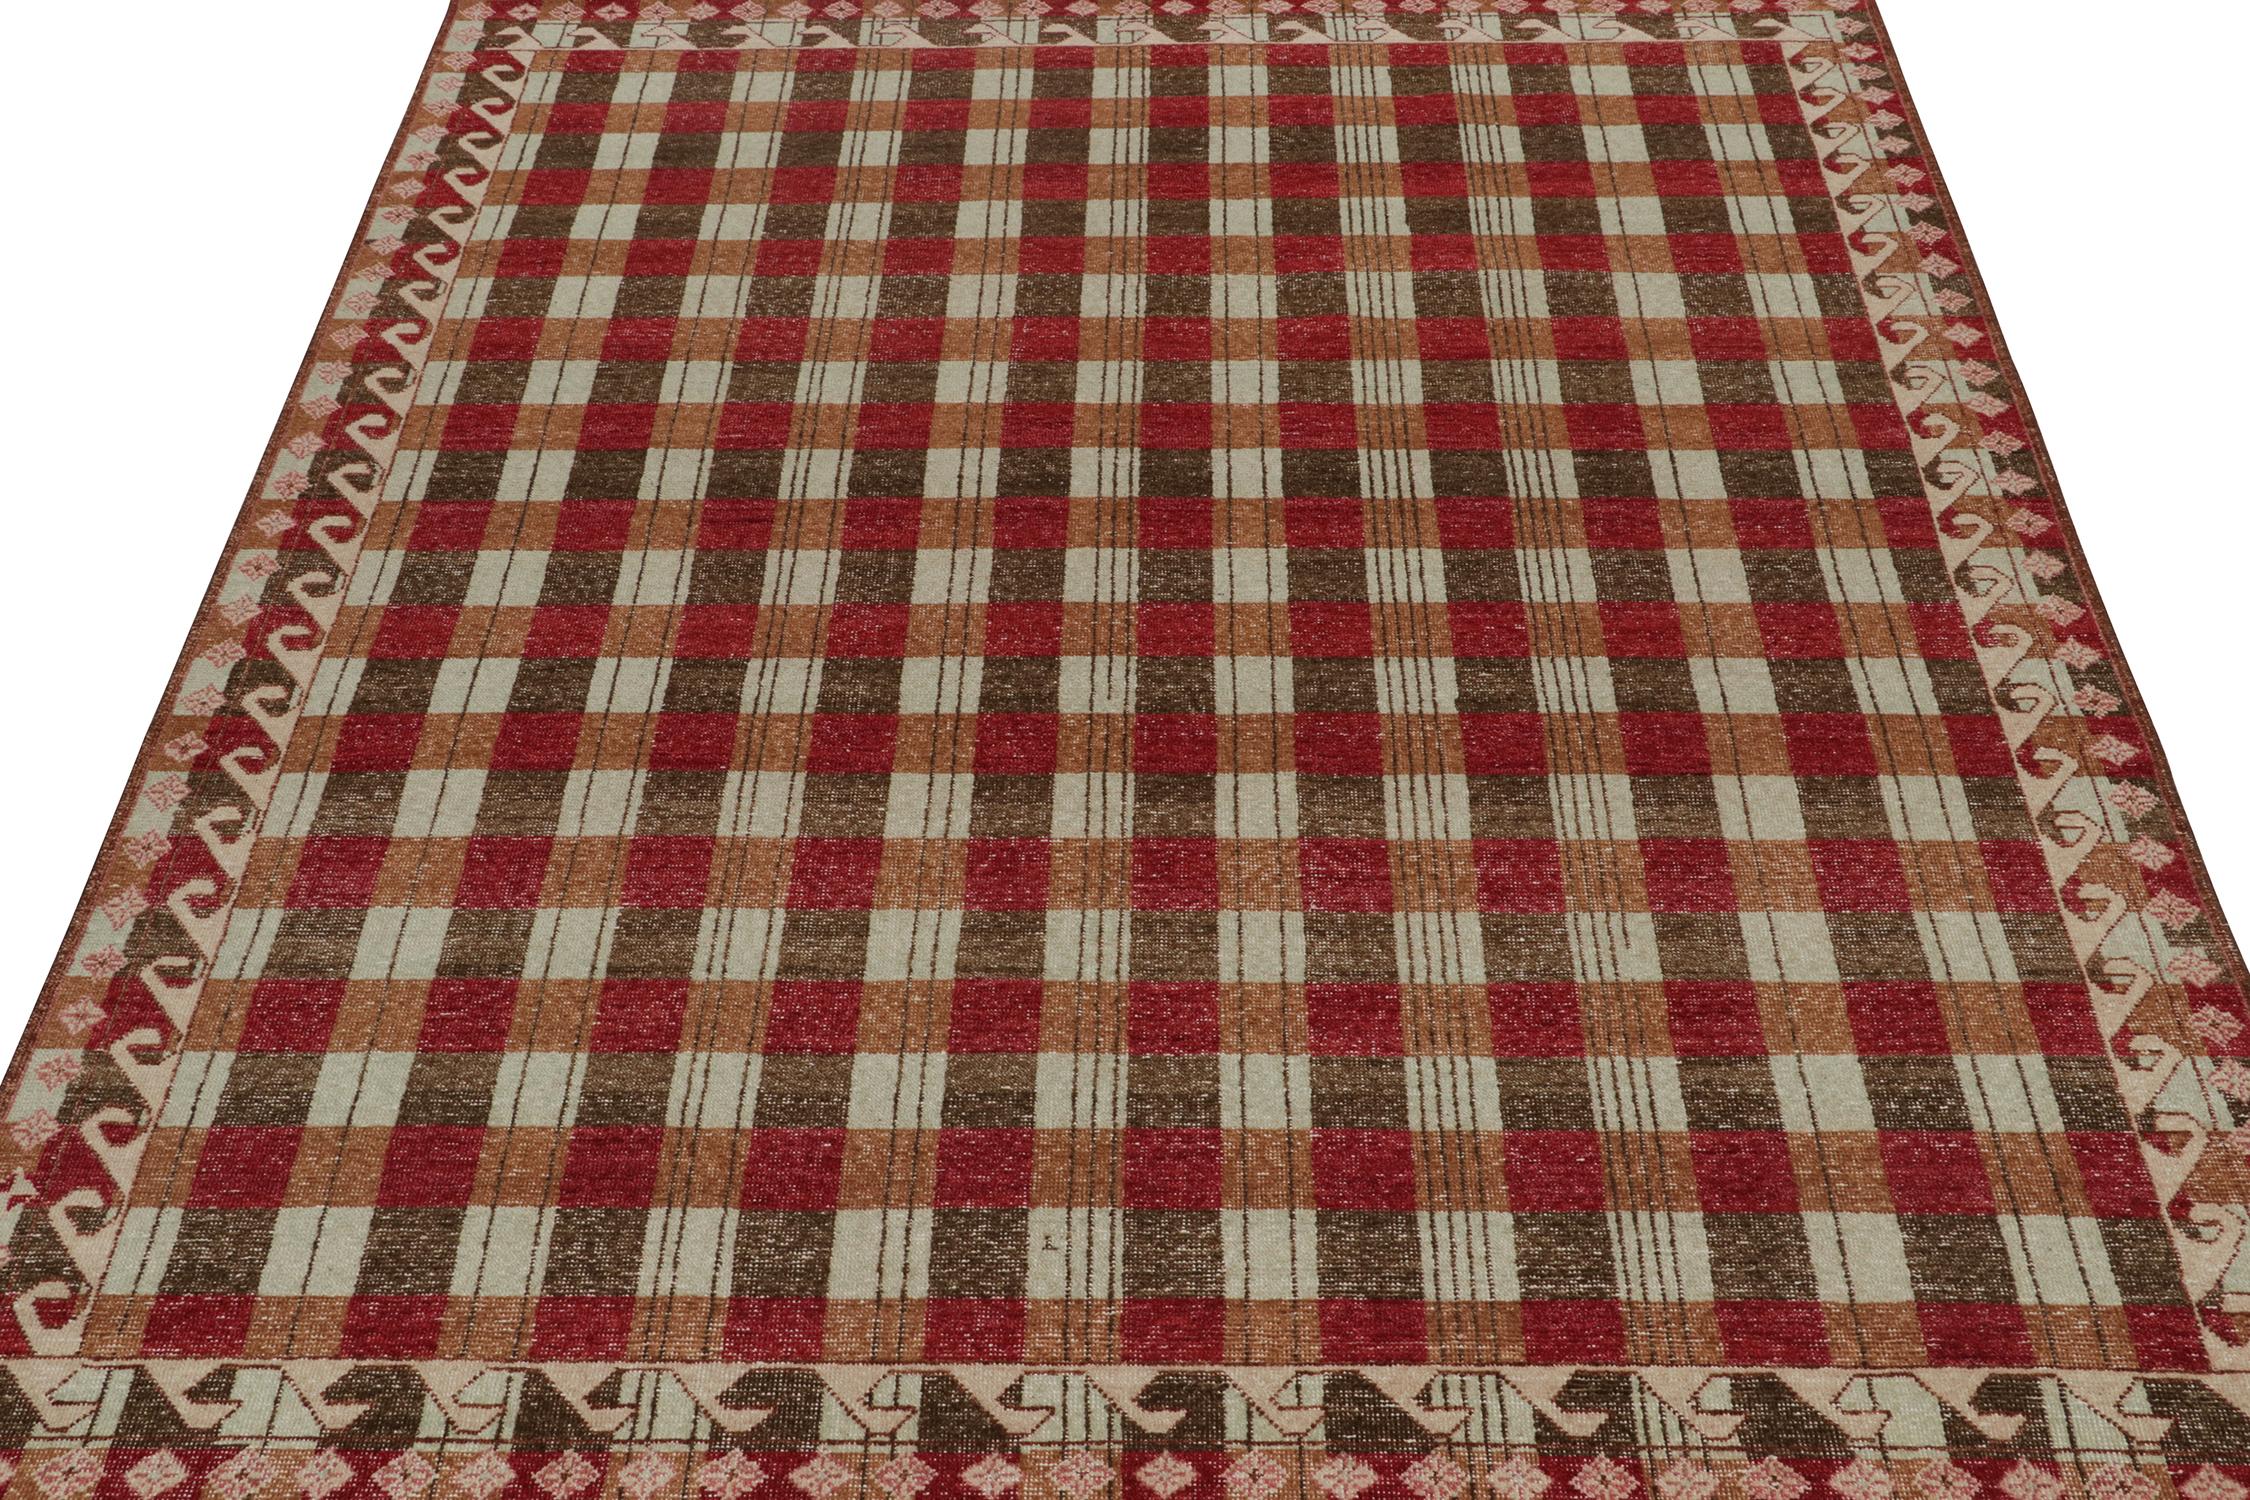 An 8x10 modern rug, hand-knotted in distressed style wool and cotton from Rug & Kilim’s Homage Collection.

Further on the Design:
This design recaptures mid-century Scandinavian rug designs, and favors red and brown geometric patterns with rust and